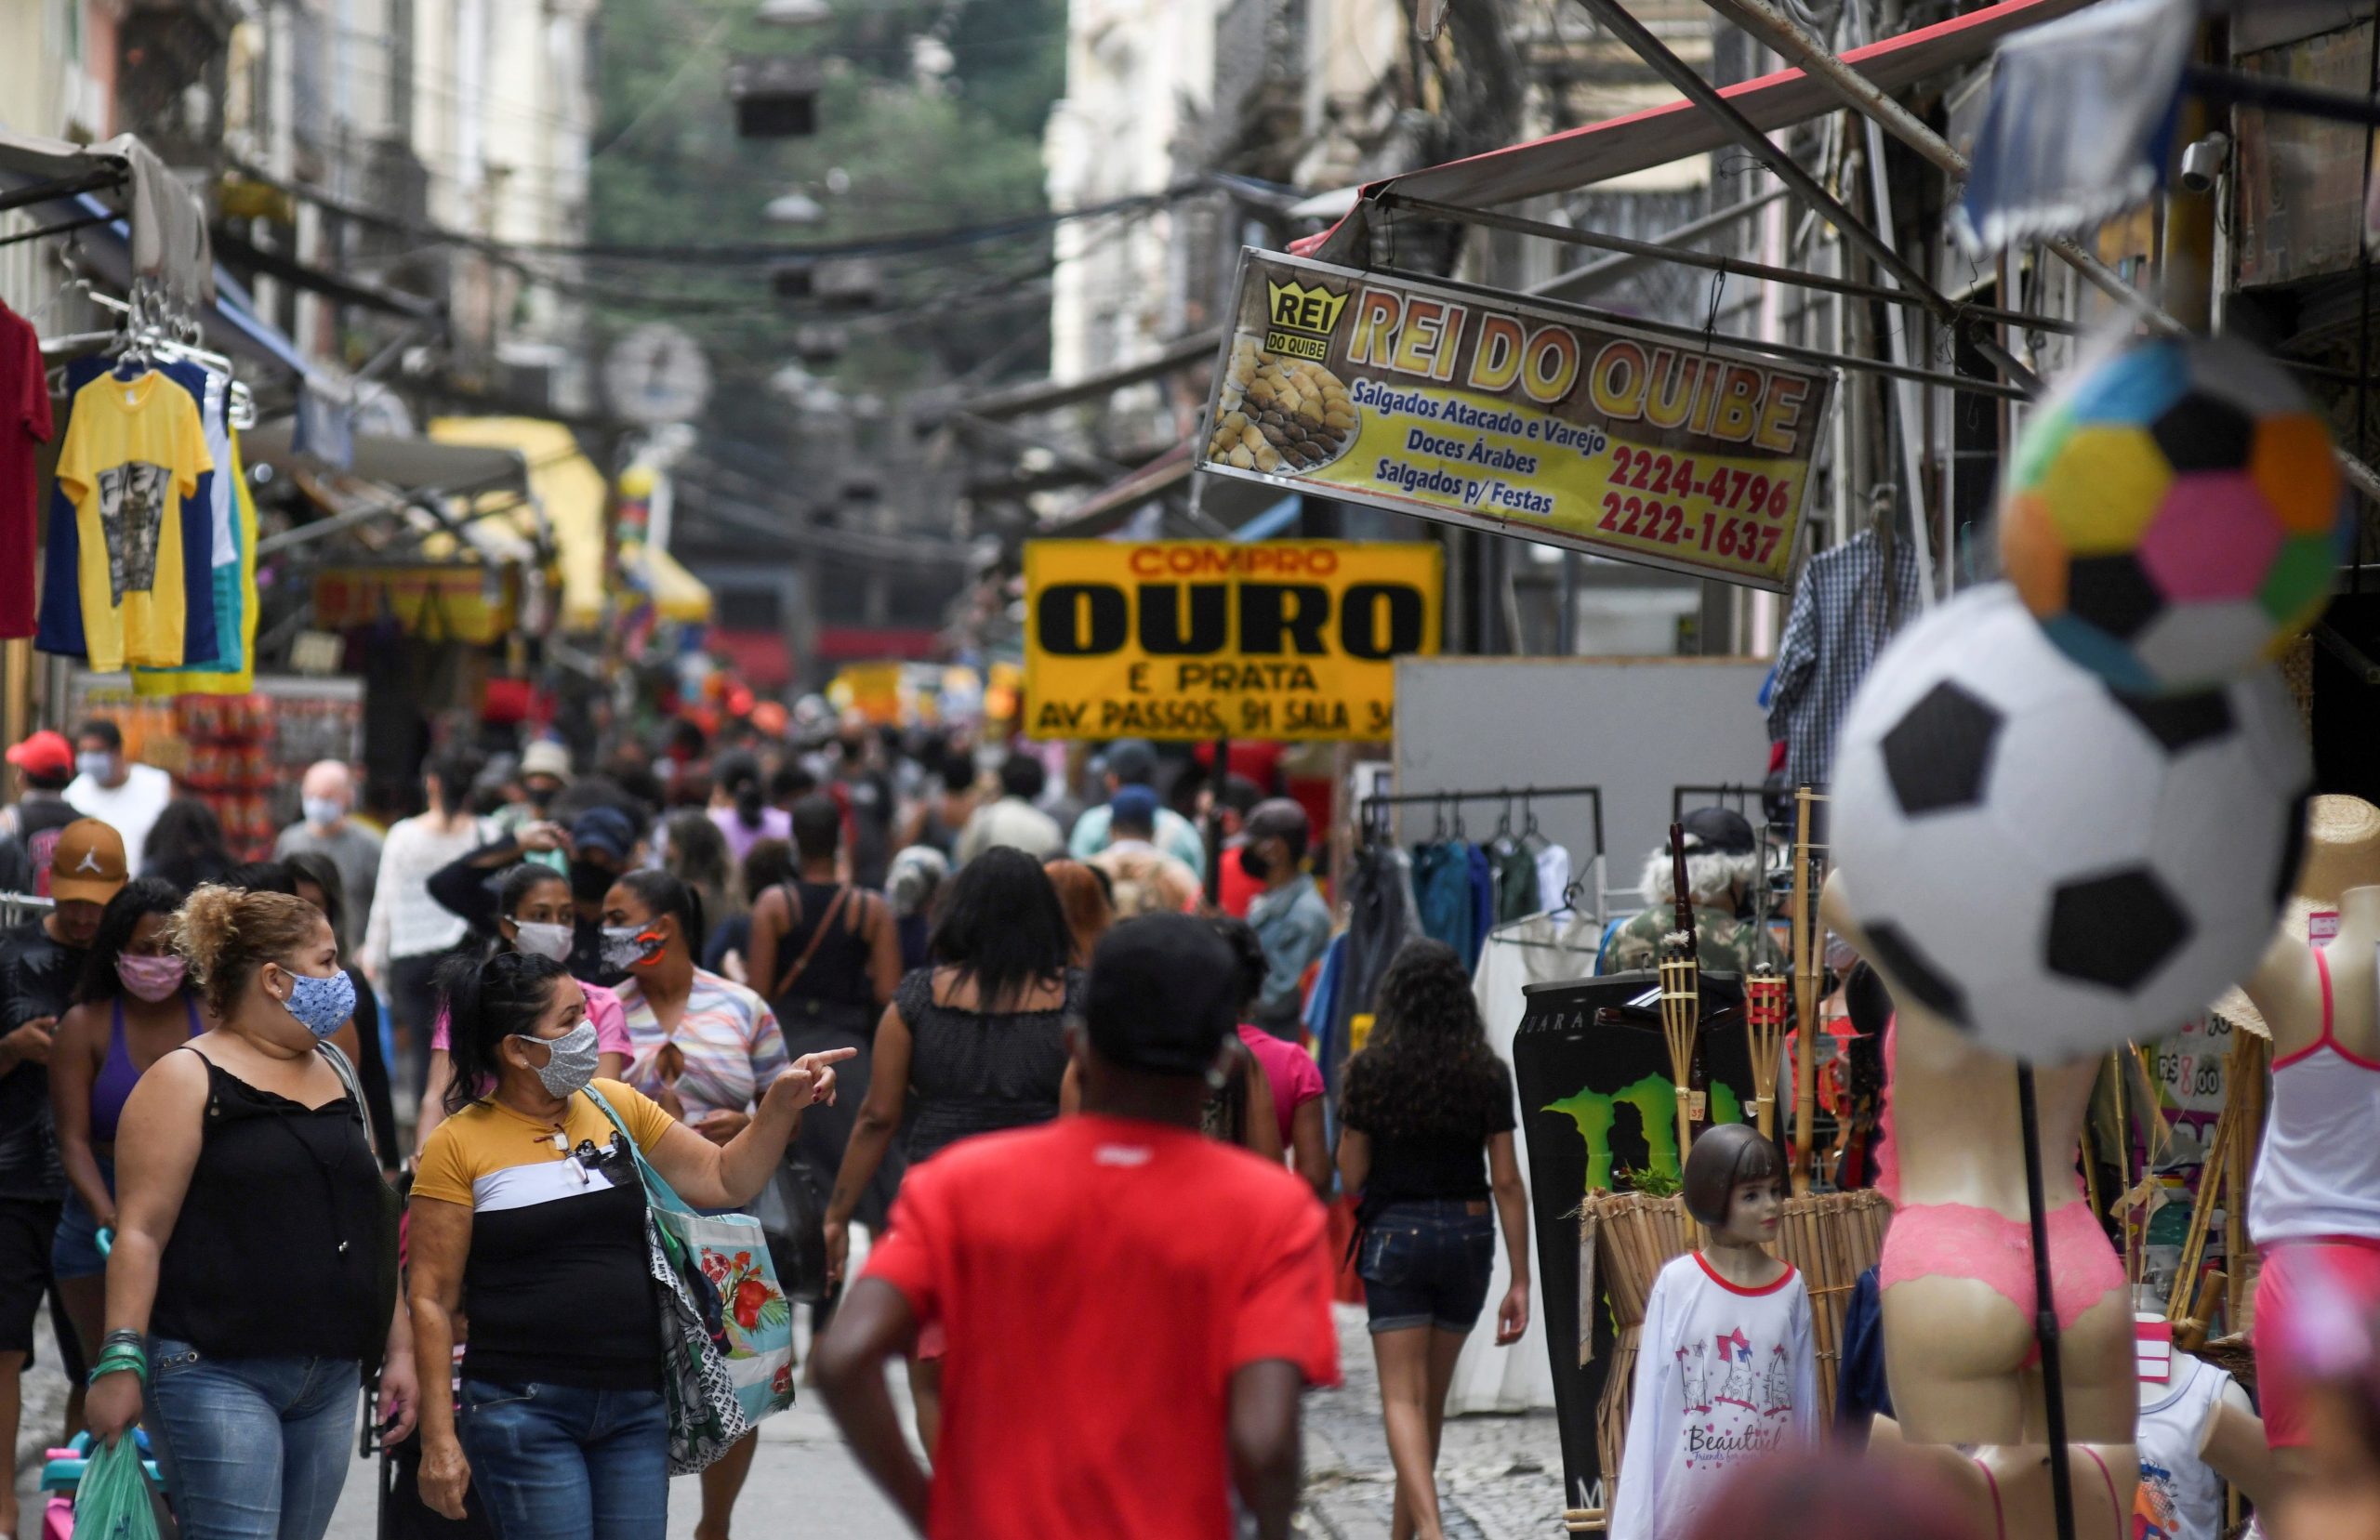 FILE PHOTO: People walk at a popular shopping street, as the city eases restrictions and allows commerce to open, amid the coronavirus disease (COVID-19) outbreak in Rio de Janeiro, Brazil June 29, 2020. REUTERS/Lucas Landau